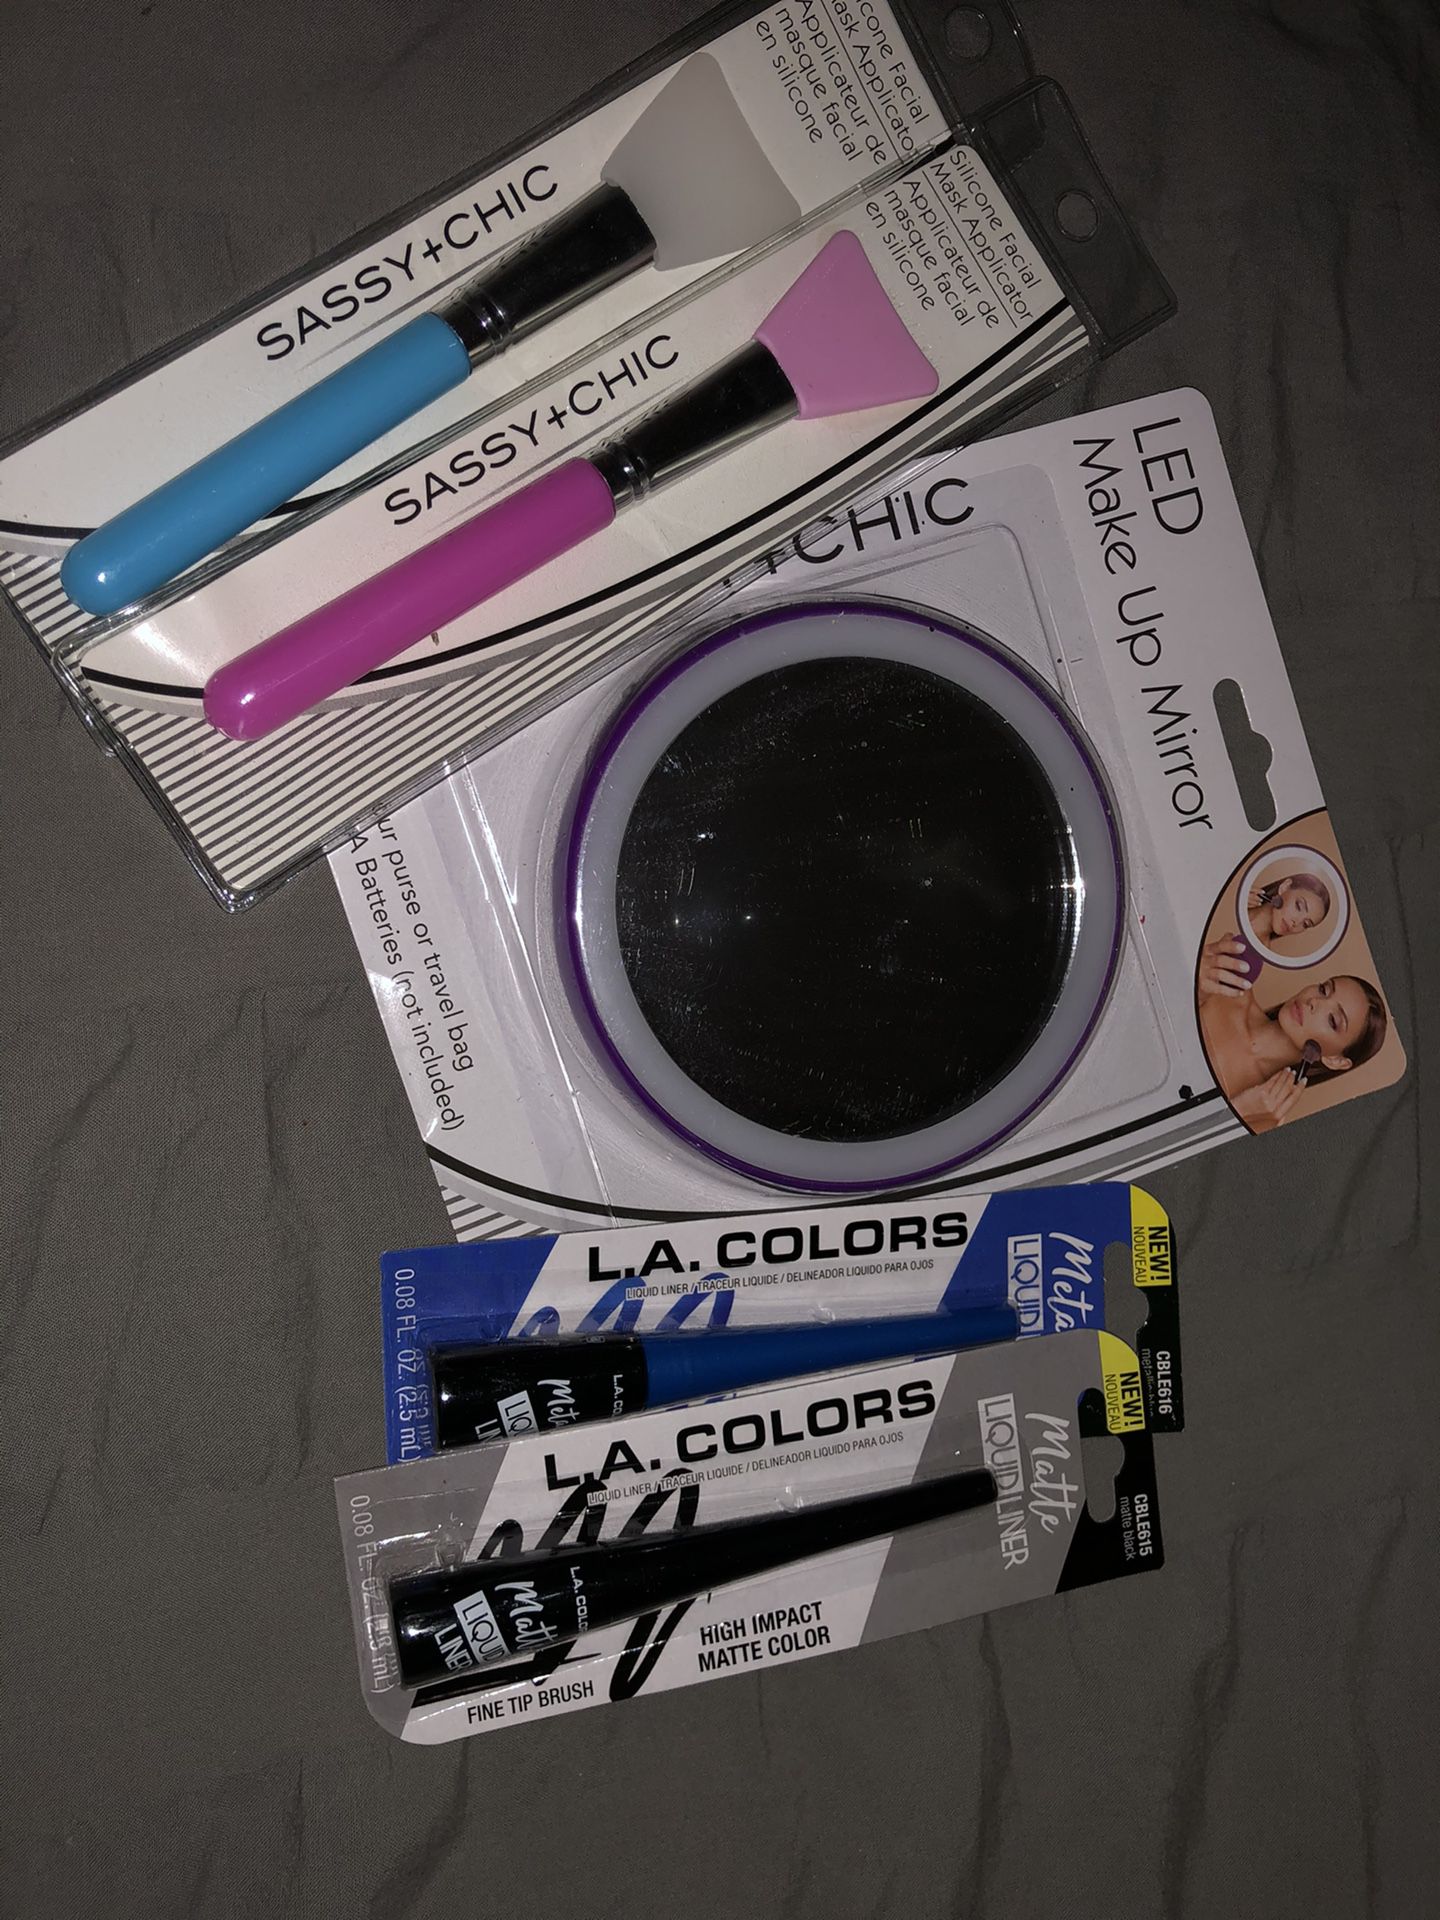 Face Mask Applicators, Eye Liners & a Mirror